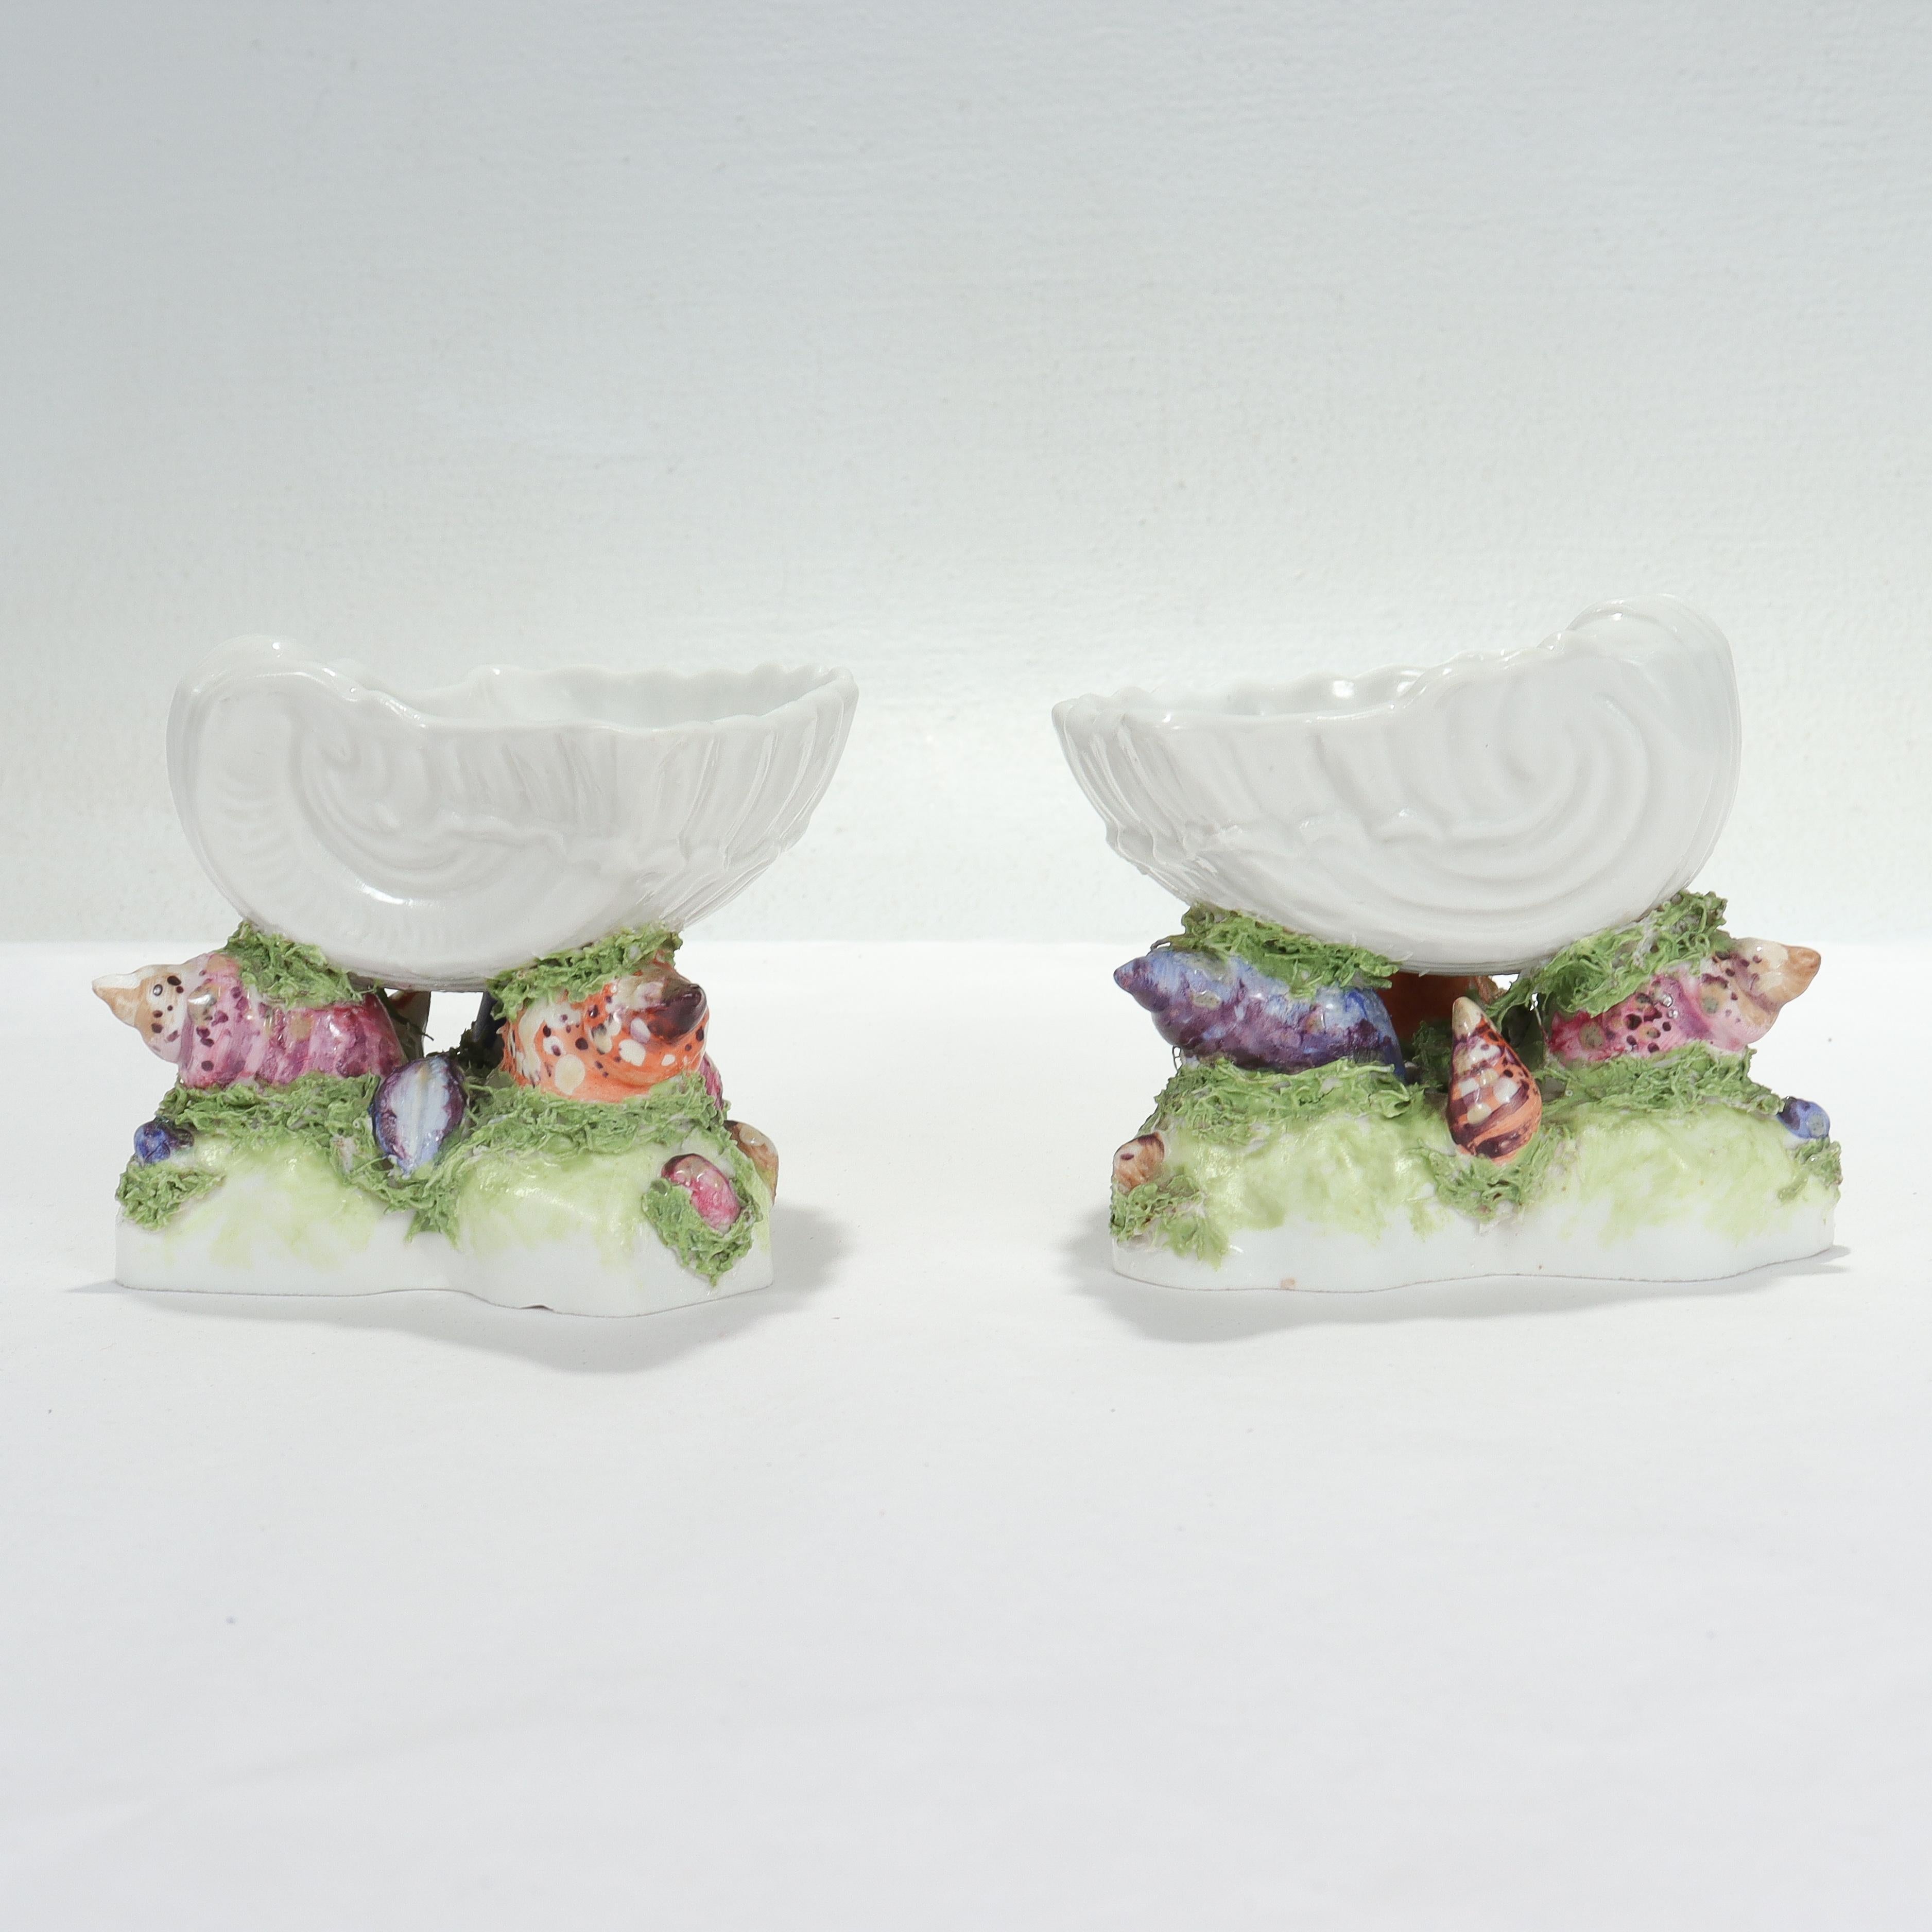 Antique Samson Worcester Style Porcelain Figural Seashell Sweetmeat Bowls/Dishes In Fair Condition For Sale In Philadelphia, PA